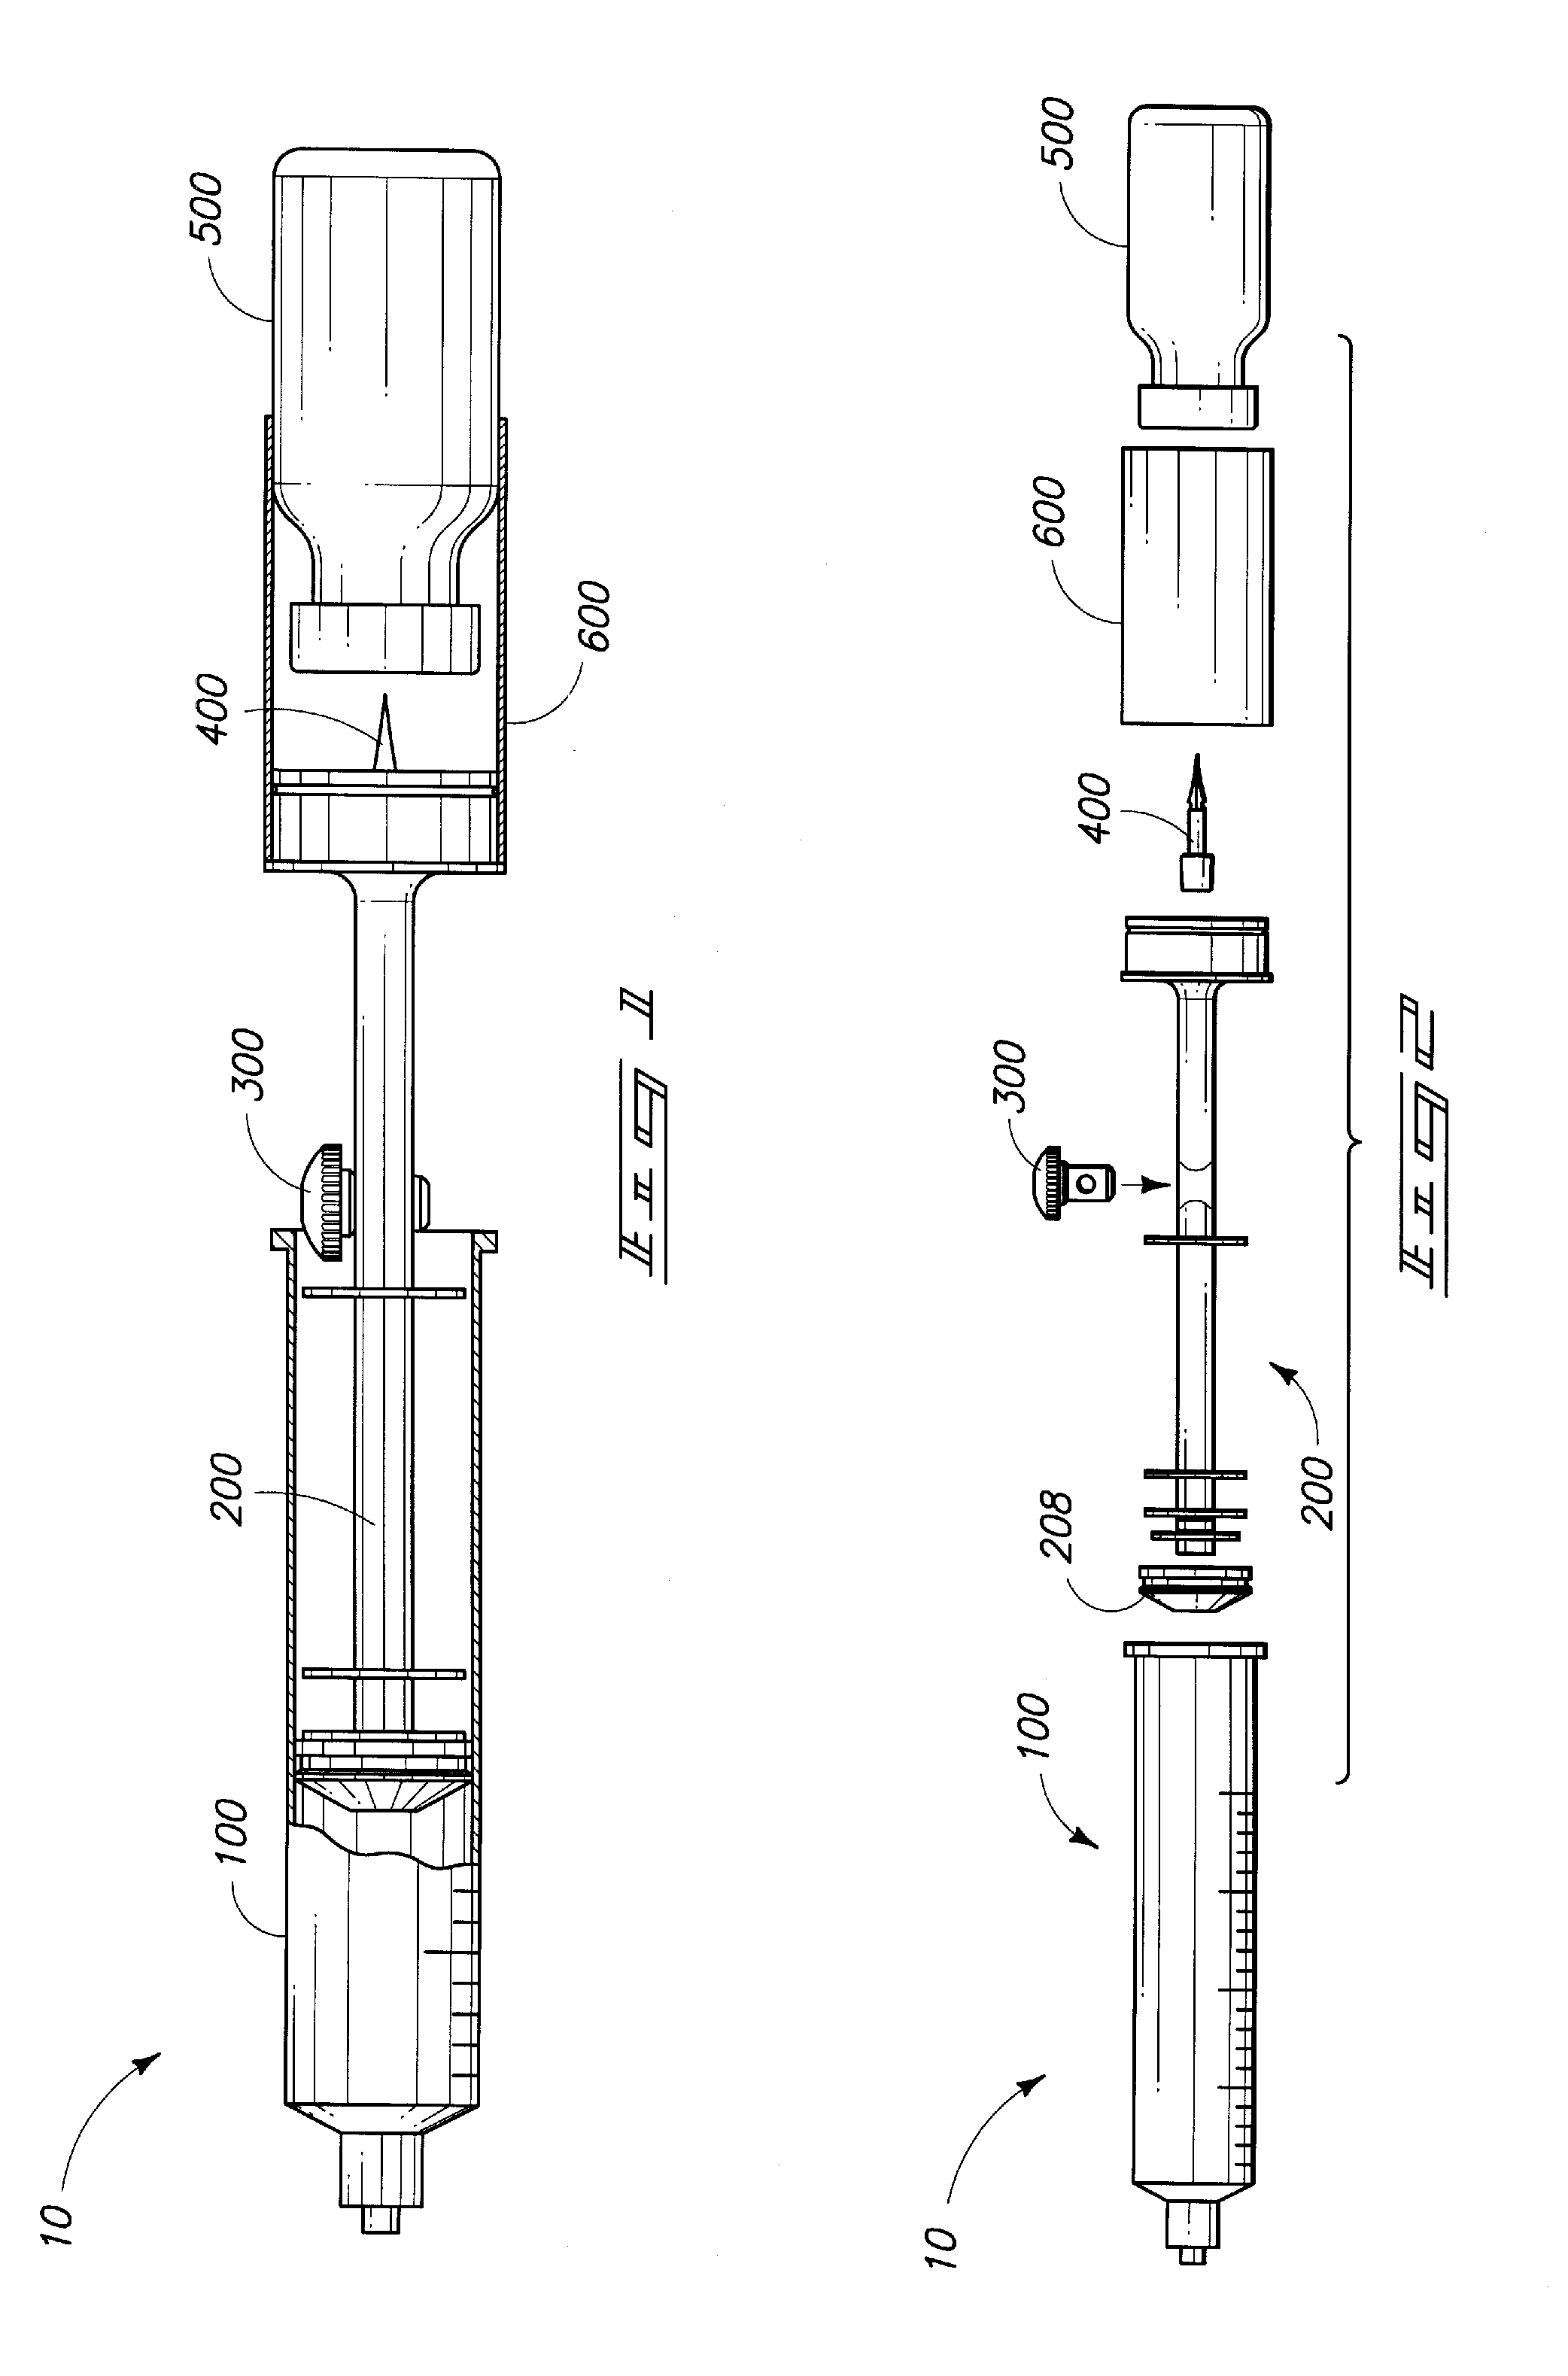 Syringe Devices and Methods for Mixing and Administering Medication